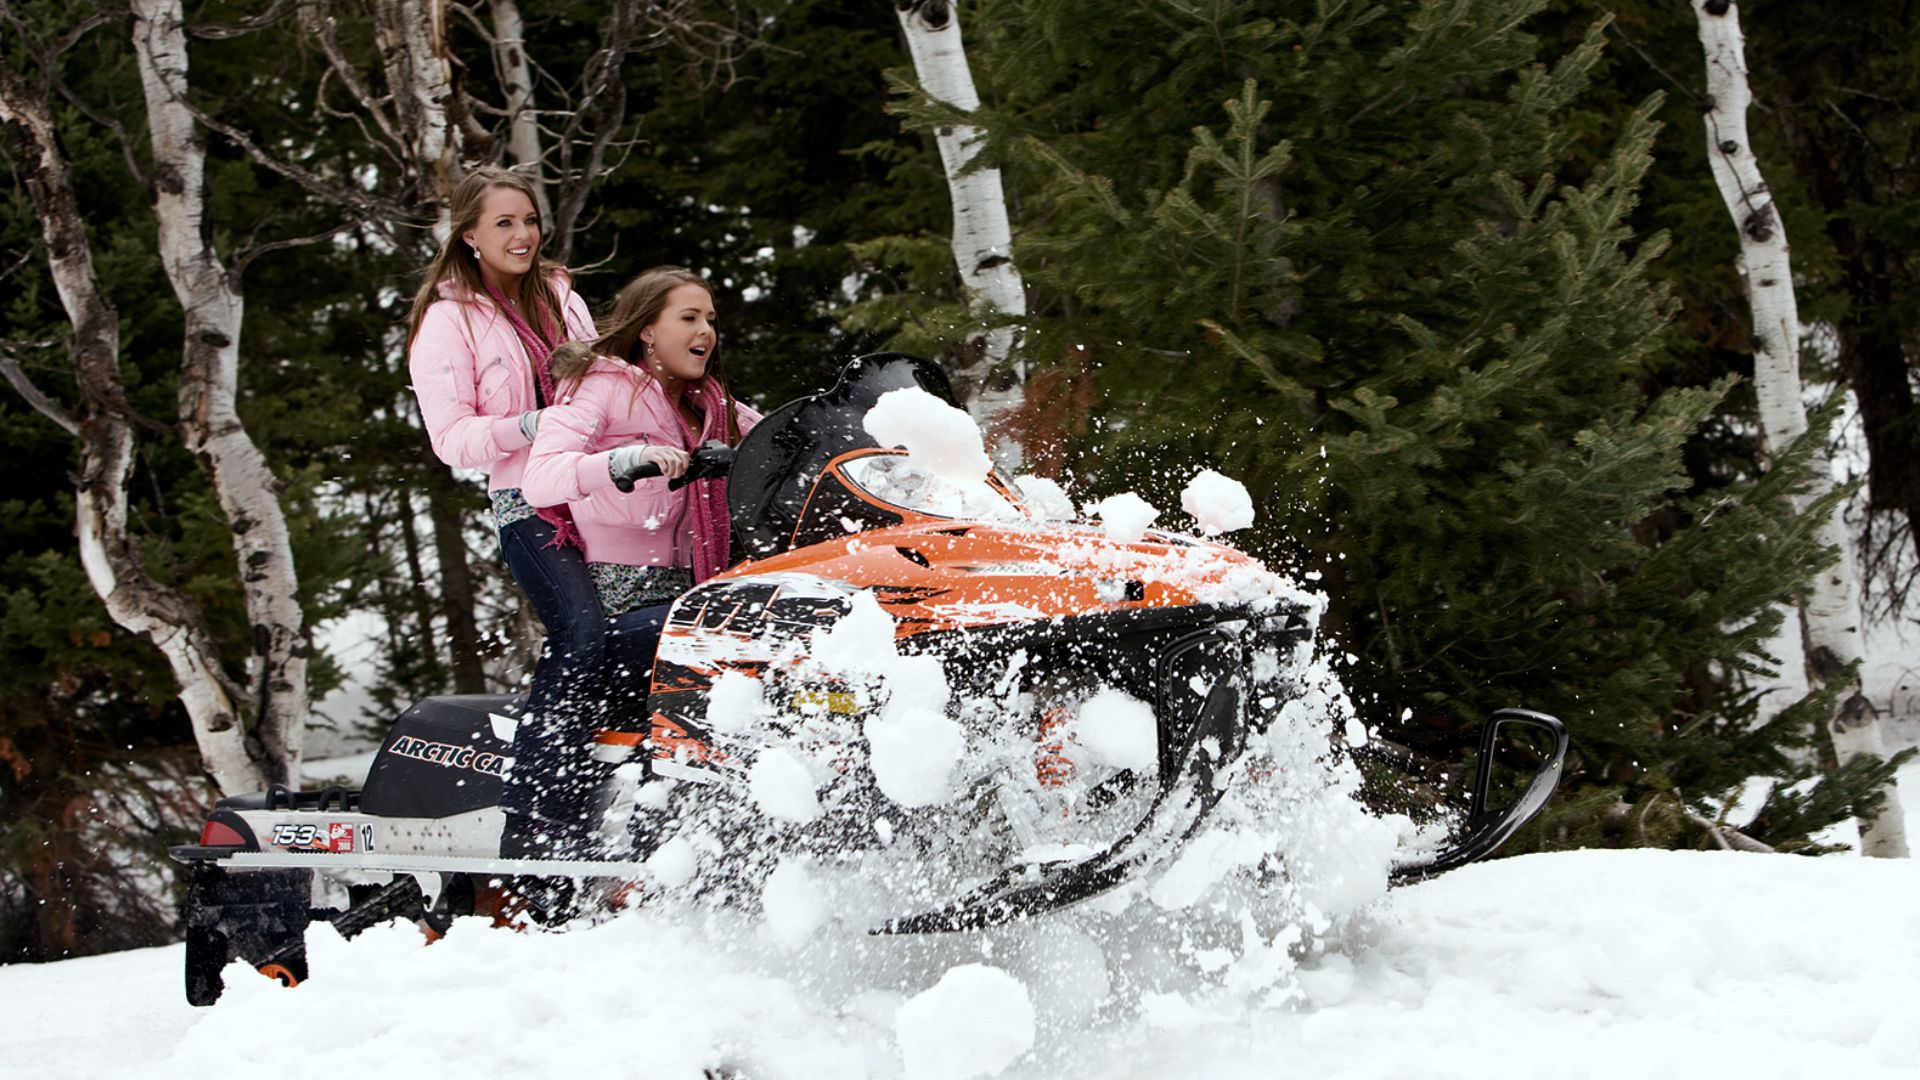 Snowmobile Photos Download The BEST Free Snowmobile Stock Photos  HD  Images